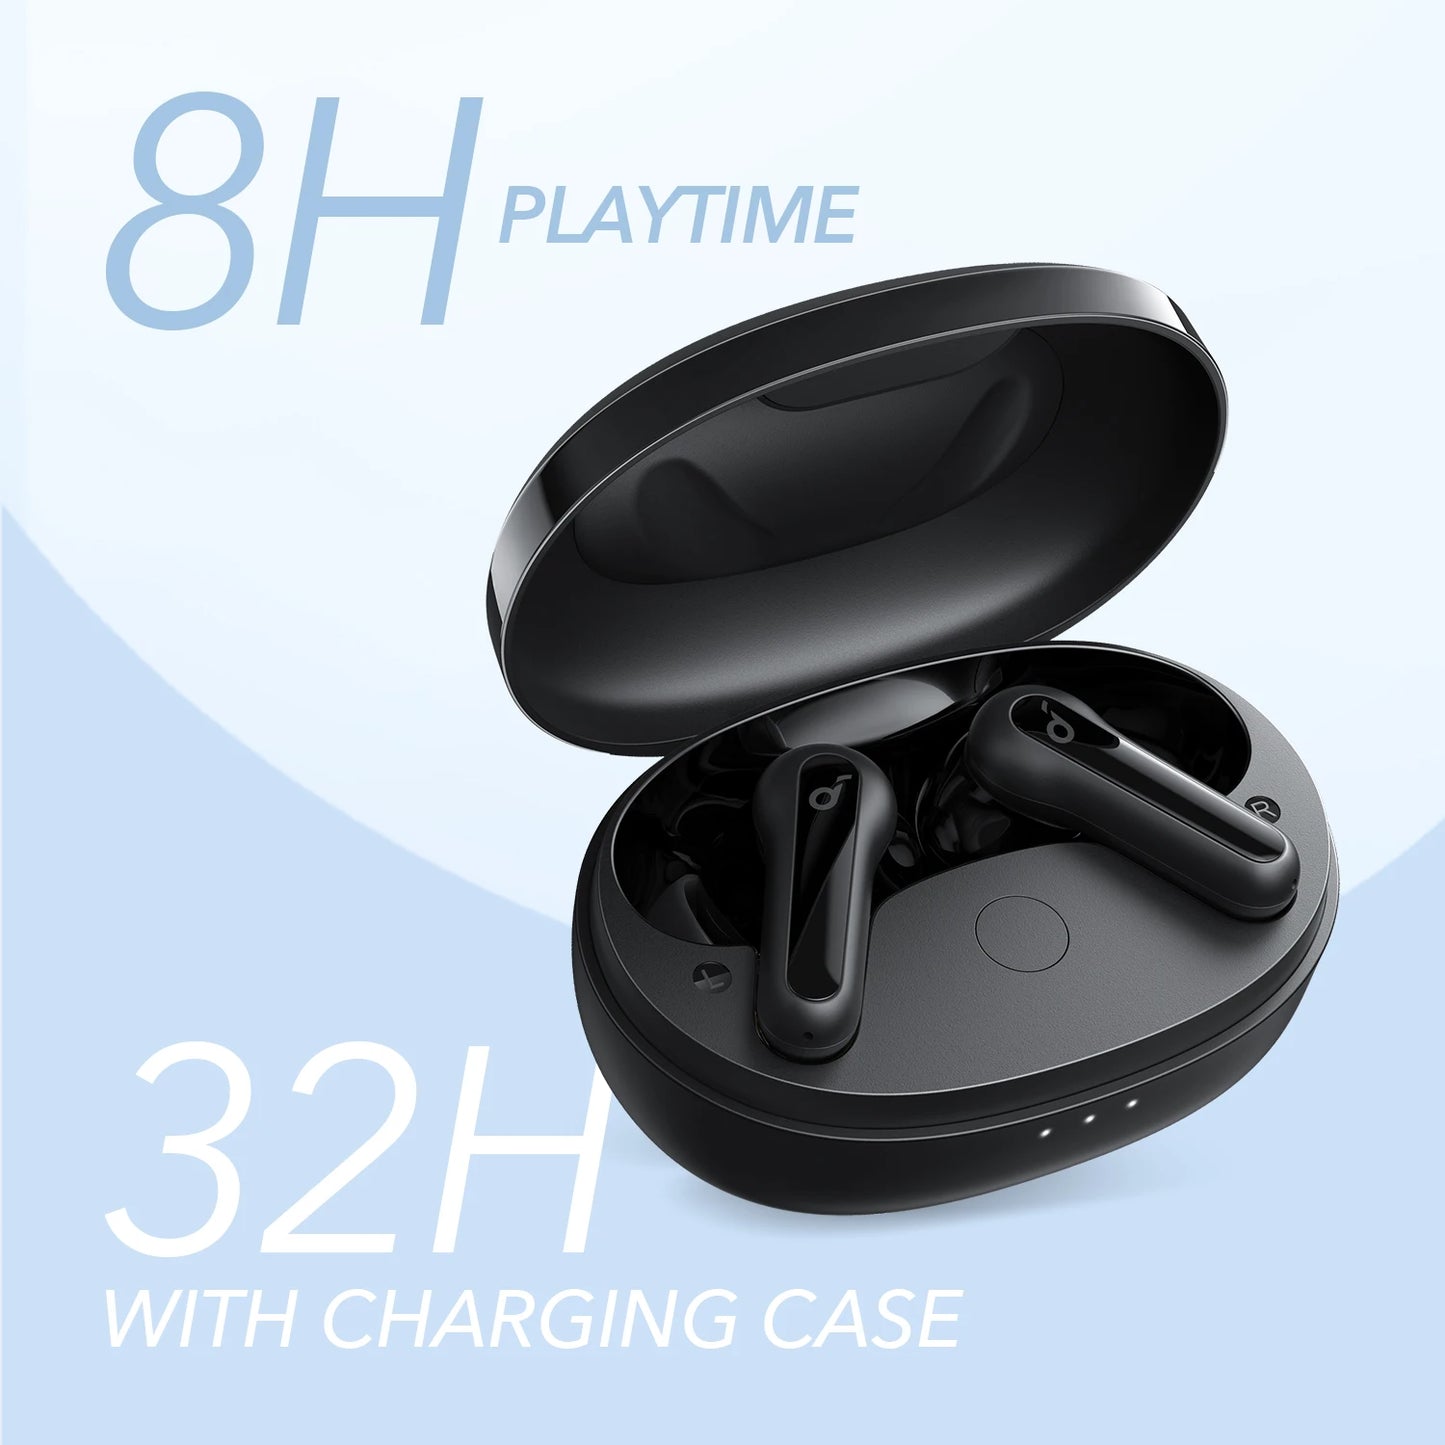 Mini True Wireless Earbuds, blue tooth earphones with Big Bass, Bluetooth 5.2, 32H Playtime